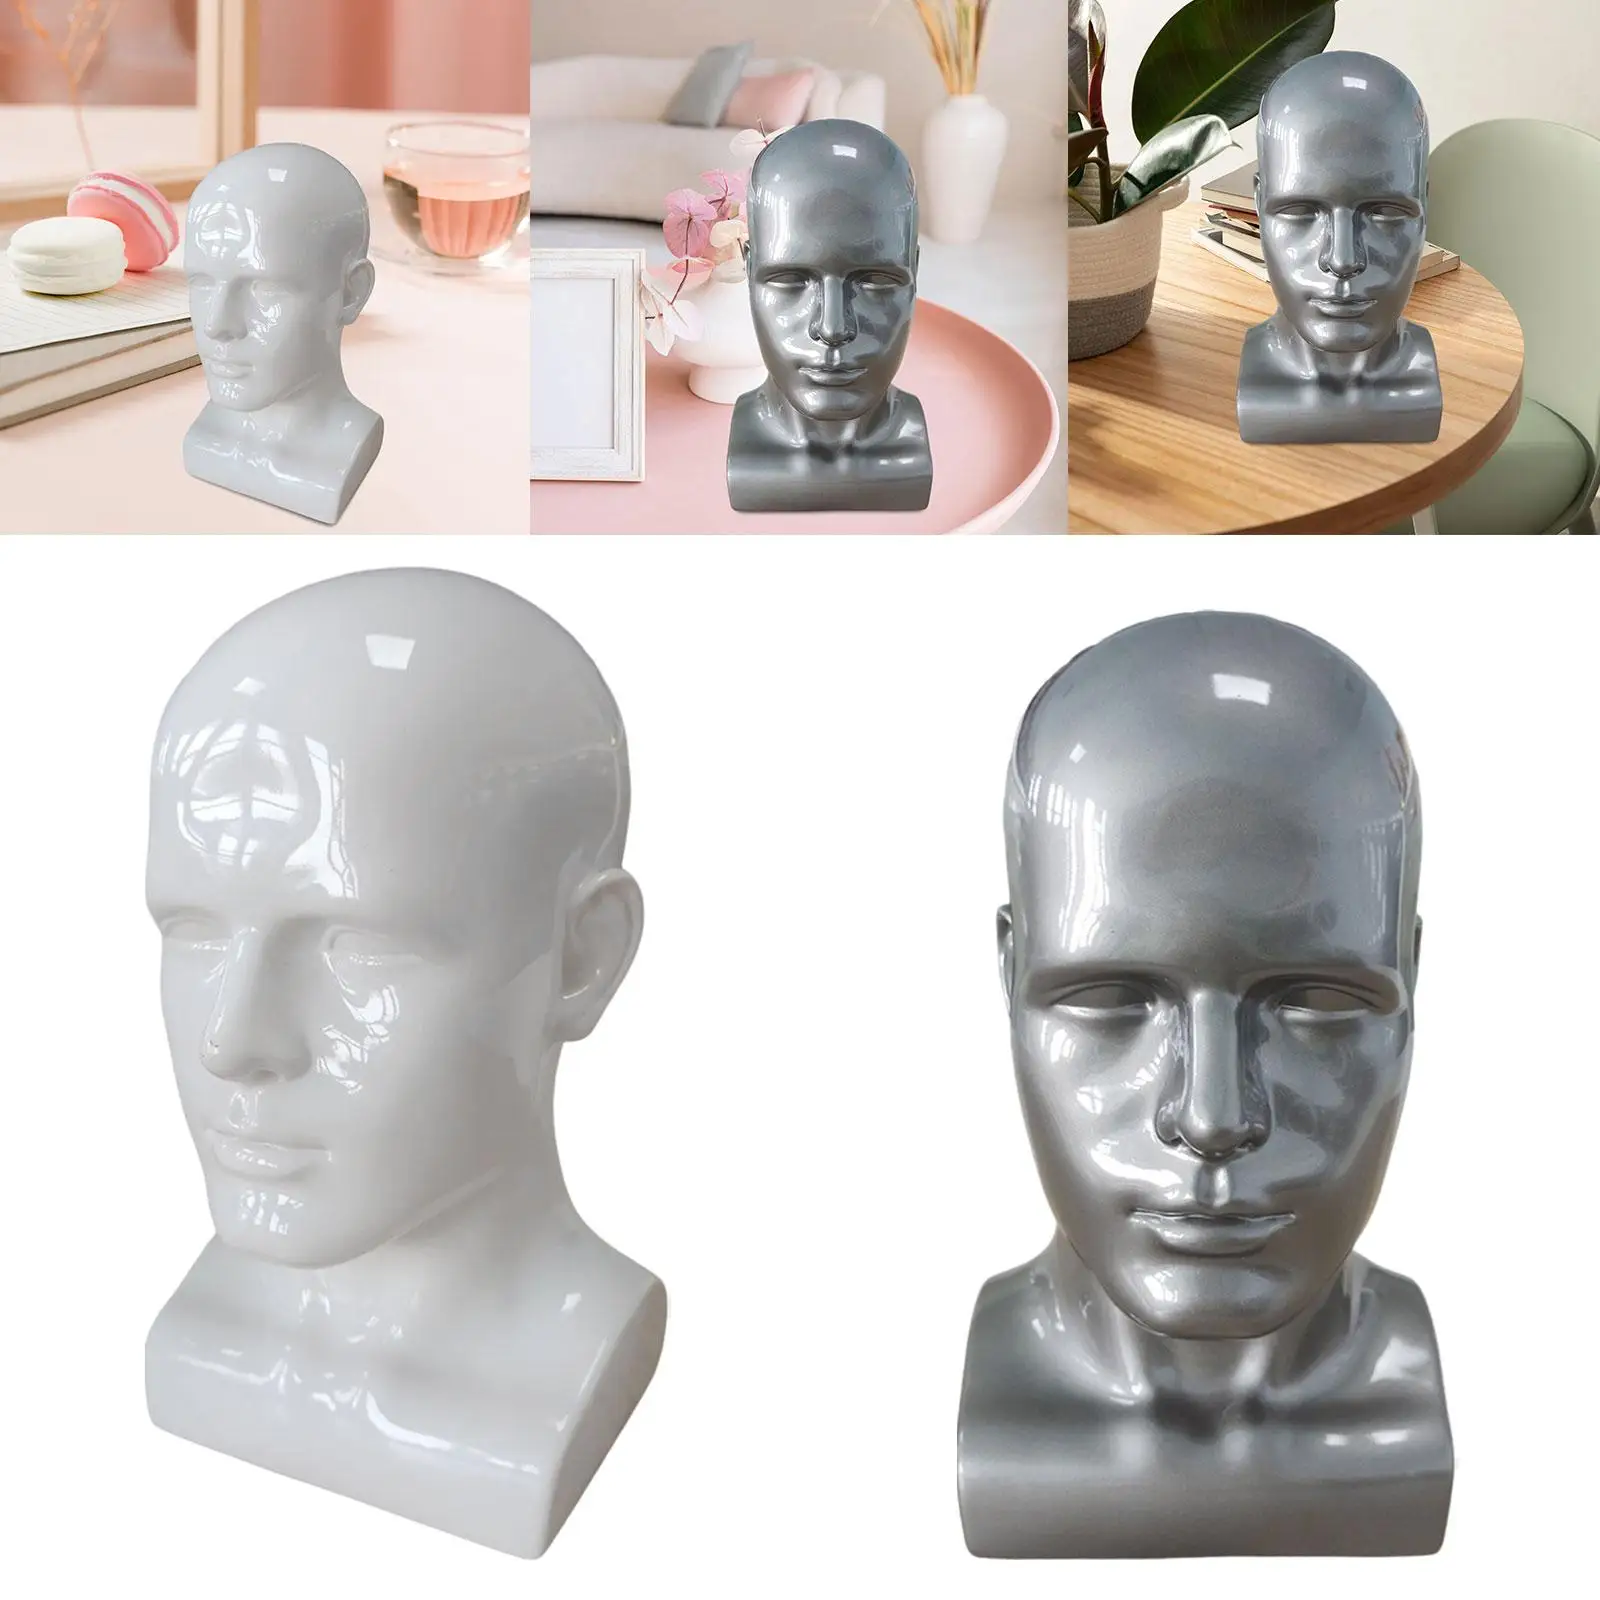 PVC Mannequin Male Head Model Beauty Styling Tool for Displaying Headset, Headphone Professional Home Decoration Sturdy